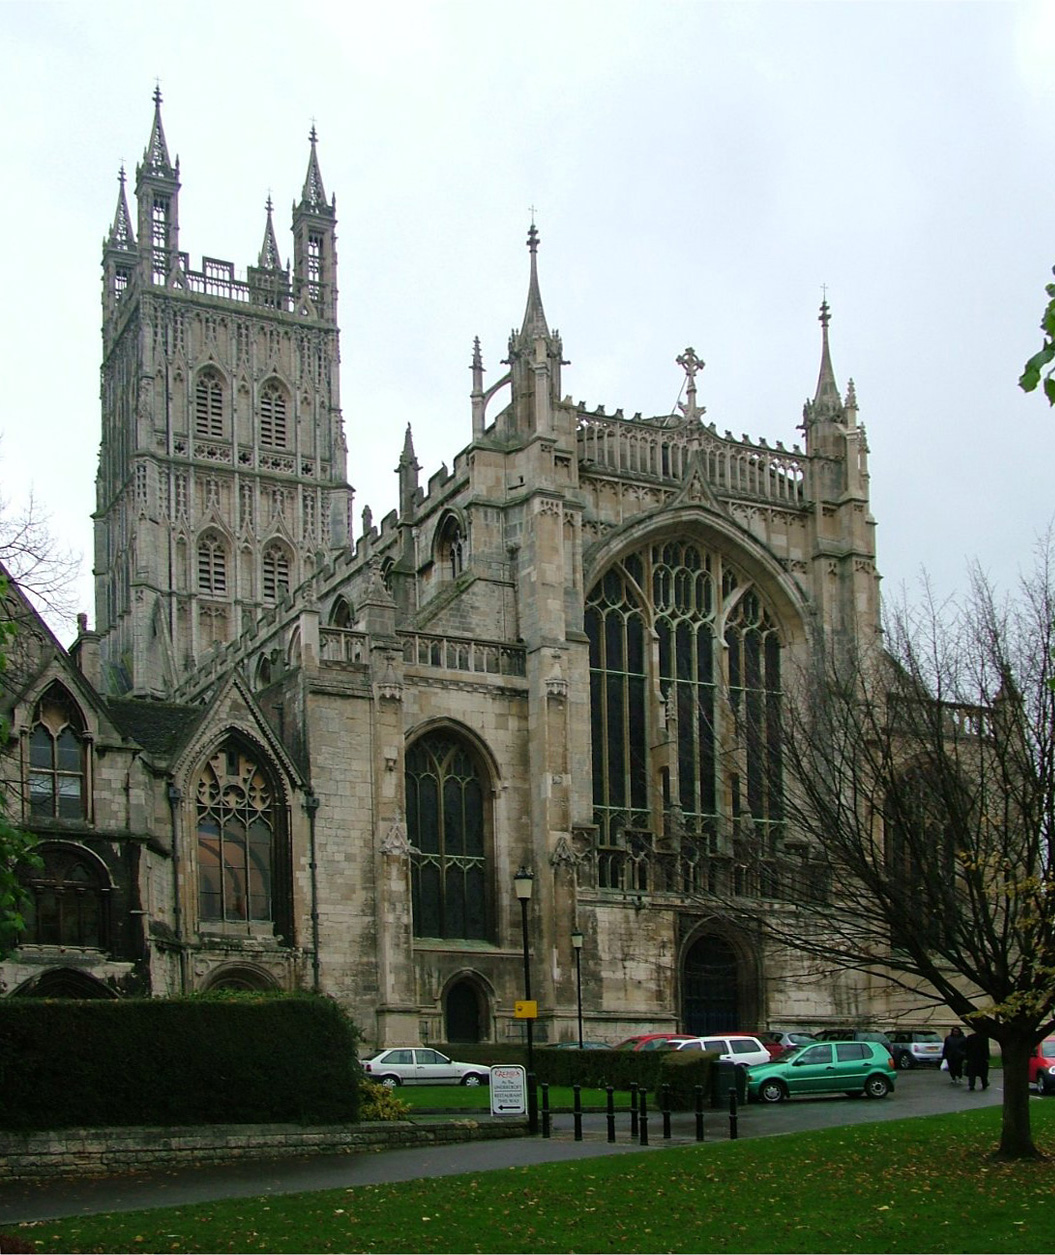 File:Gloucester Cathedral - 2004-11-02.jpg - Wikimedia Commons